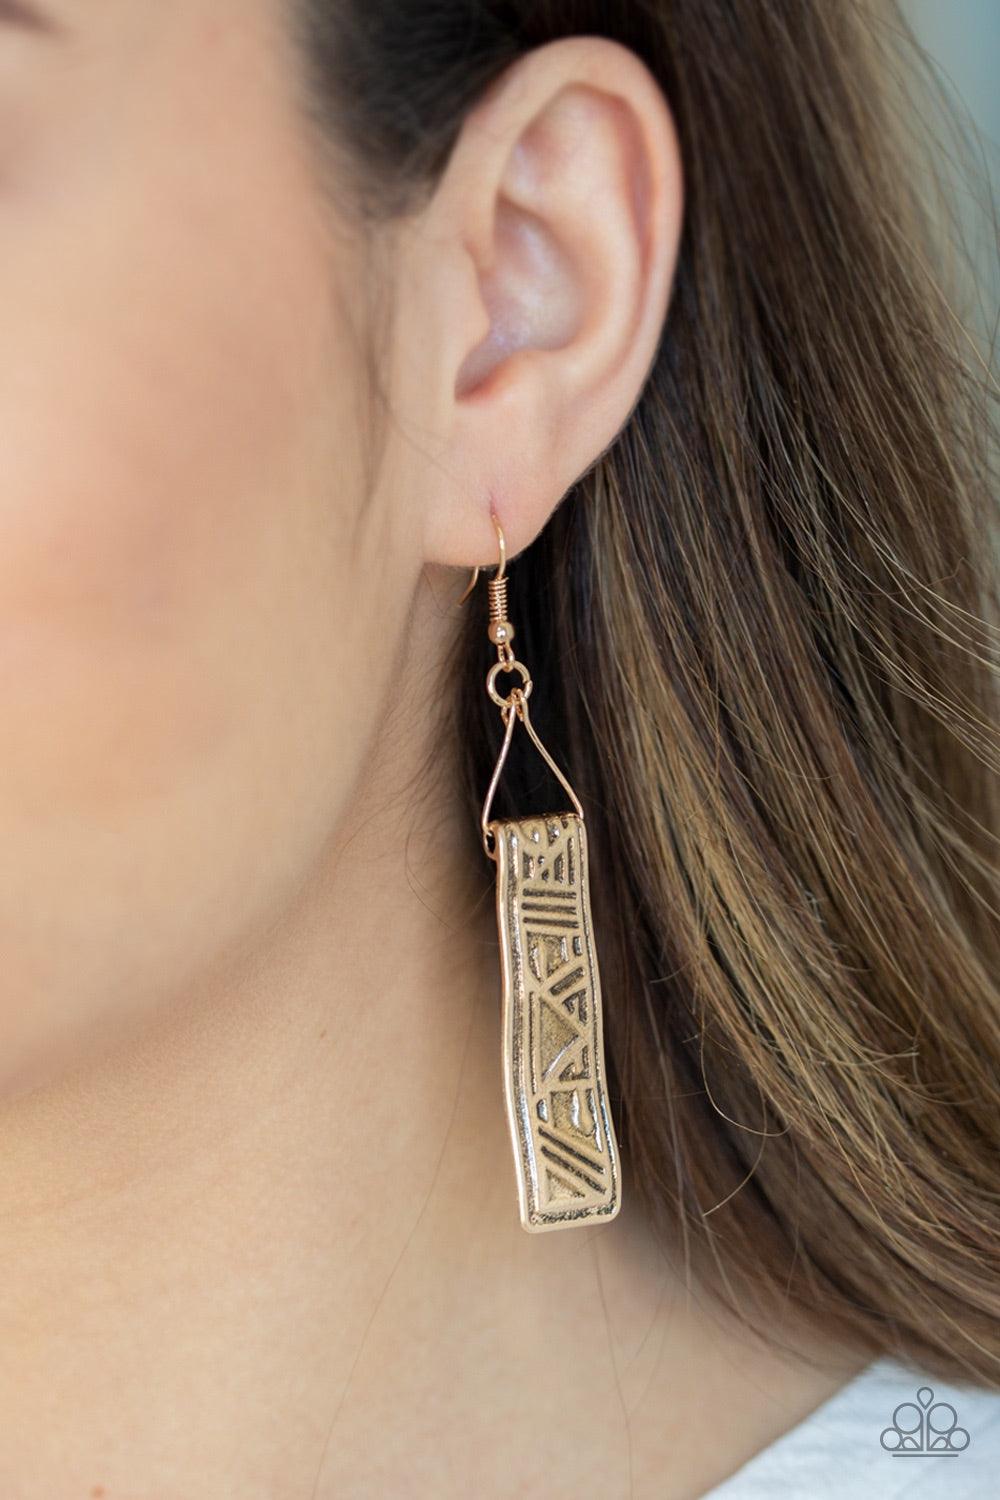 Paparazzi Accessories Ancient Artifacts - Gold Embossed in glyph-like patterns, a hammered gold frame swings from a dainty wire fitting for a tribal inspired finish. Earring attaches to a standard fishhook fitting. Jewelry